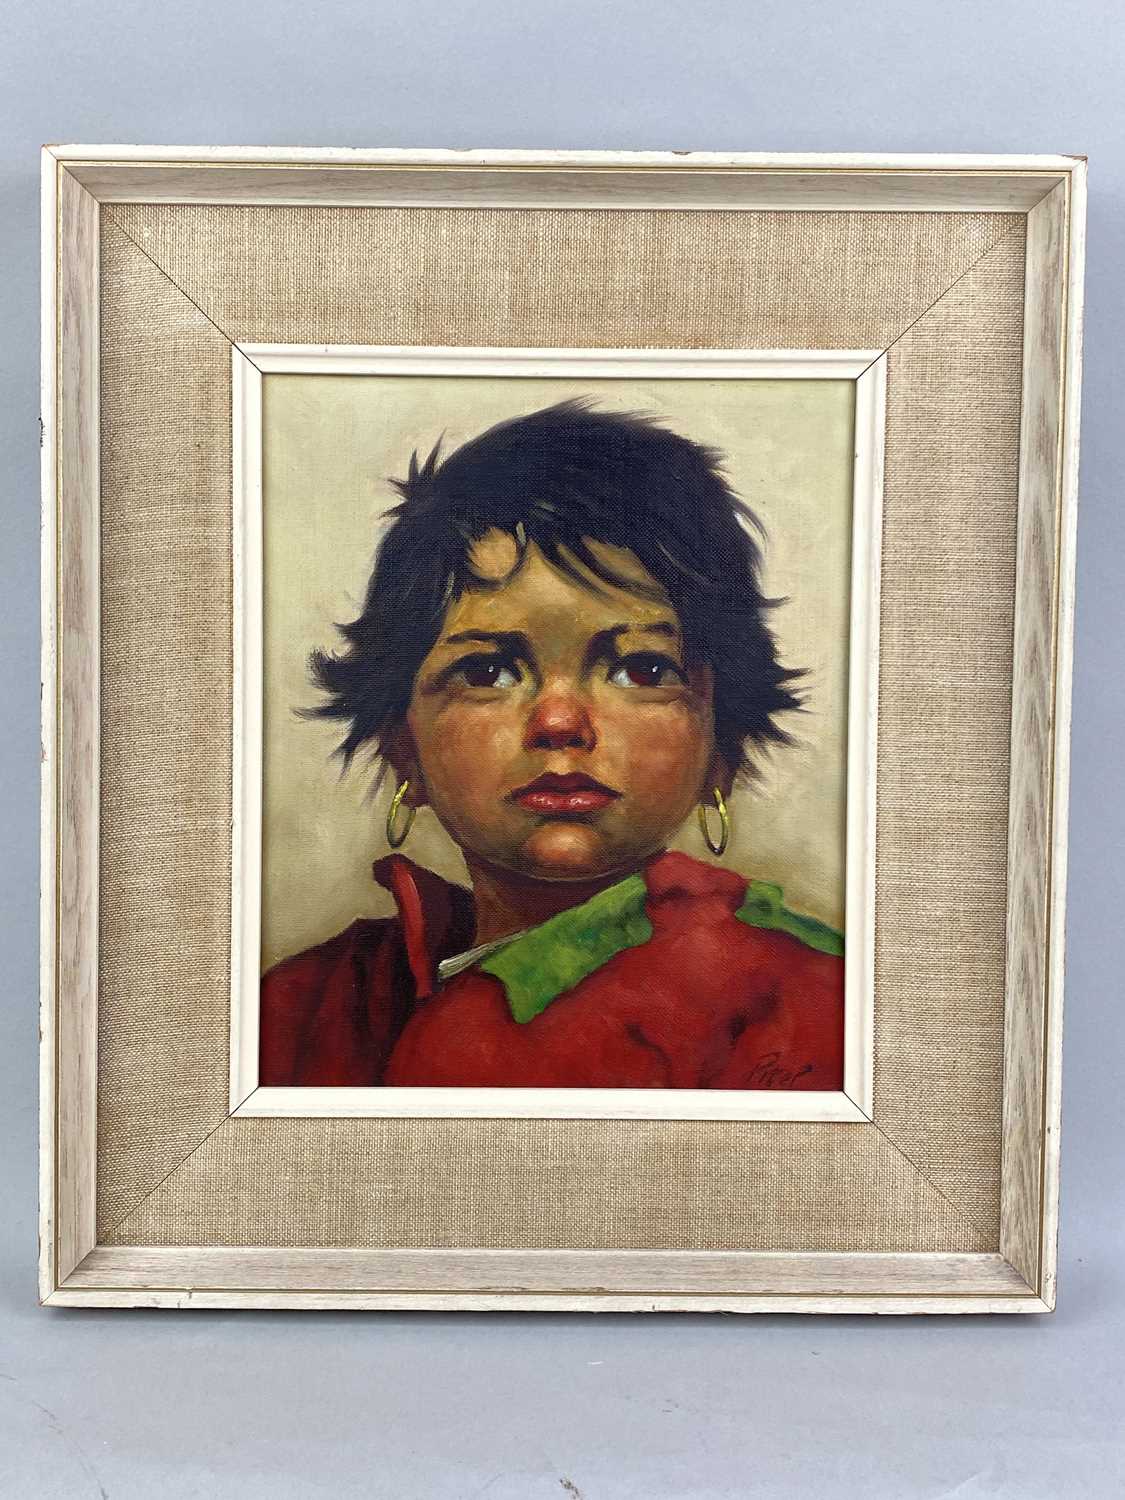 Lot 100 - GYPSY CHILD, OIL ON CANVAS